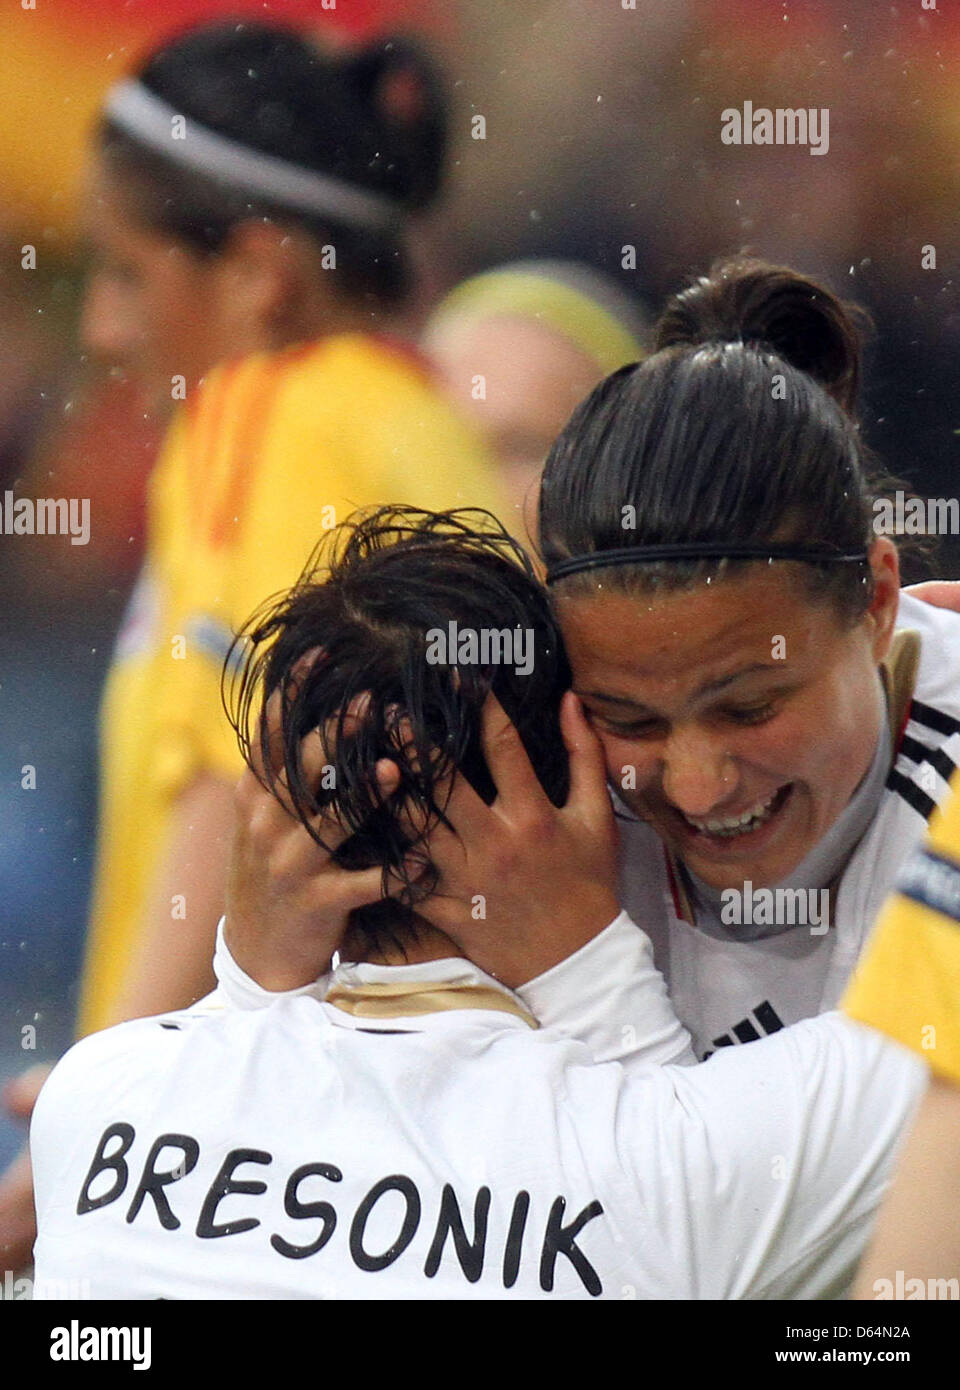 Germany's Linda Bresonik (L) celebrates her 1-0 goal with teammate Dzsenifer Marozsan during the qualification match for the women's European Soccer Championshiop between Germany and Rumania at Schueco Arena in Bielefeld, Germany, 31 May 2012. Photo: OLIVER KRATO Stock Photo